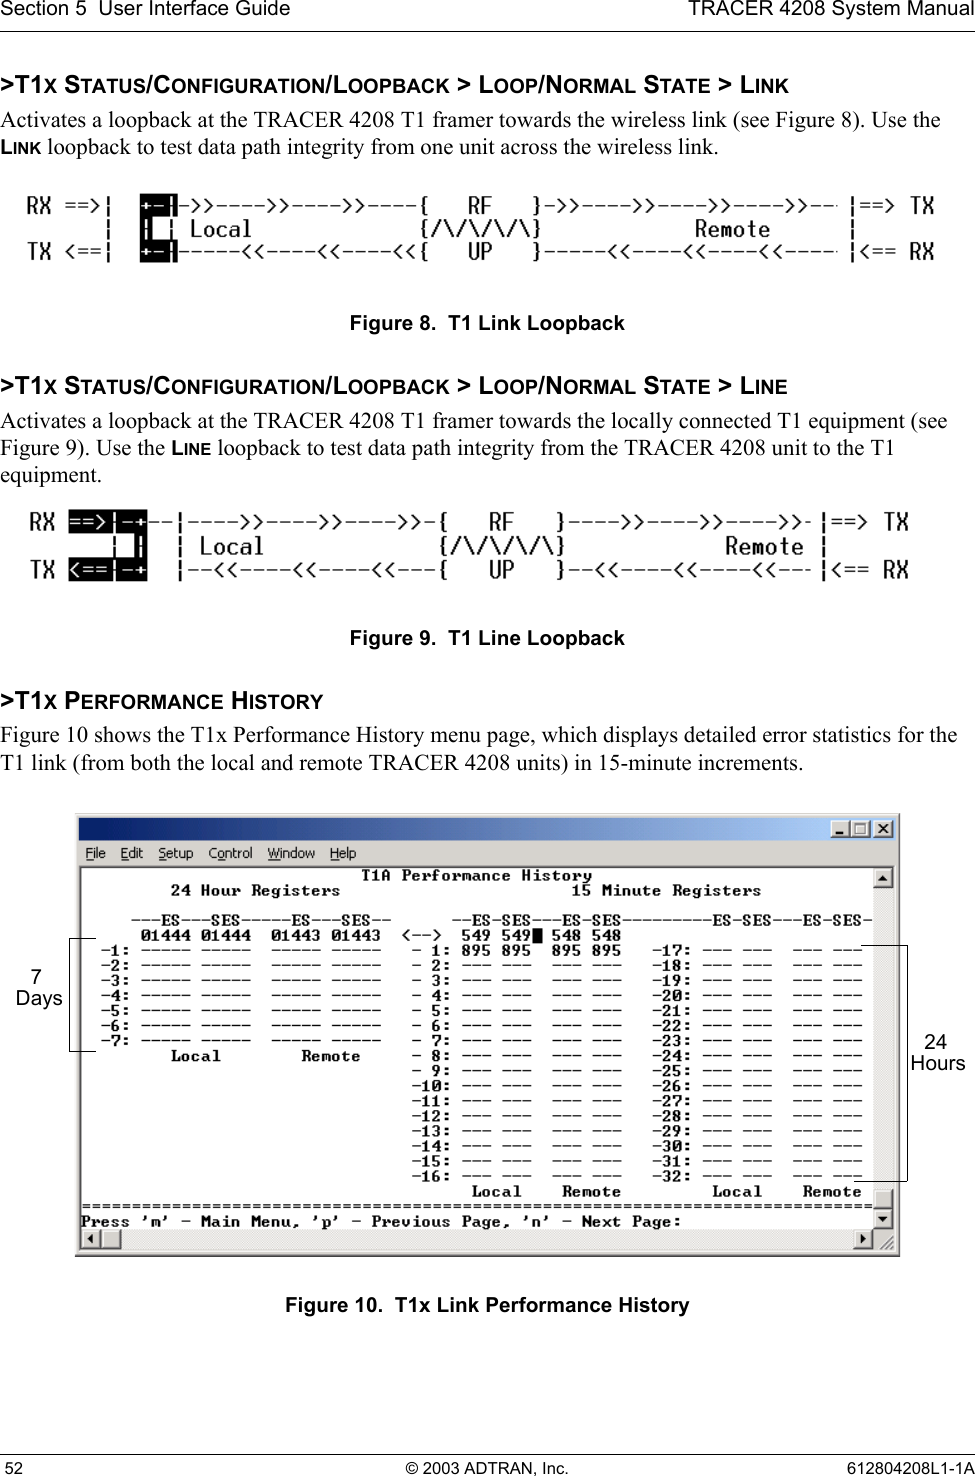 Section 5  User Interface Guide TRACER 4208 System Manual 52 © 2003 ADTRAN, Inc. 612804208L1-1A&gt;T1X STATUS/CONFIGURATION/LOOPBACK &gt; LOOP/NORMAL STATE &gt; LINKActivates a loopback at the TRACER 4208 T1 framer towards the wireless link (see Figure 8). Use the LINK loopback to test data path integrity from one unit across the wireless link.Figure 8.  T1 Link Loopback&gt;T1X STATUS/CONFIGURATION/LOOPBACK &gt; LOOP/NORMAL STATE &gt; LINEActivates a loopback at the TRACER 4208 T1 framer towards the locally connected T1 equipment (see Figure 9). Use the LINE loopback to test data path integrity from the TRACER 4208 unit to the T1 equipment.Figure 9.  T1 Line Loopback&gt;T1X PERFORMANCE HISTORYFigure 10 shows the T1x Performance History menu page, which displays detailed error statistics for the T1 link (from both the local and remote TRACER 4208 units) in 15-minute increments. Figure 10.  T1x Link Performance History24 Hours7 Days